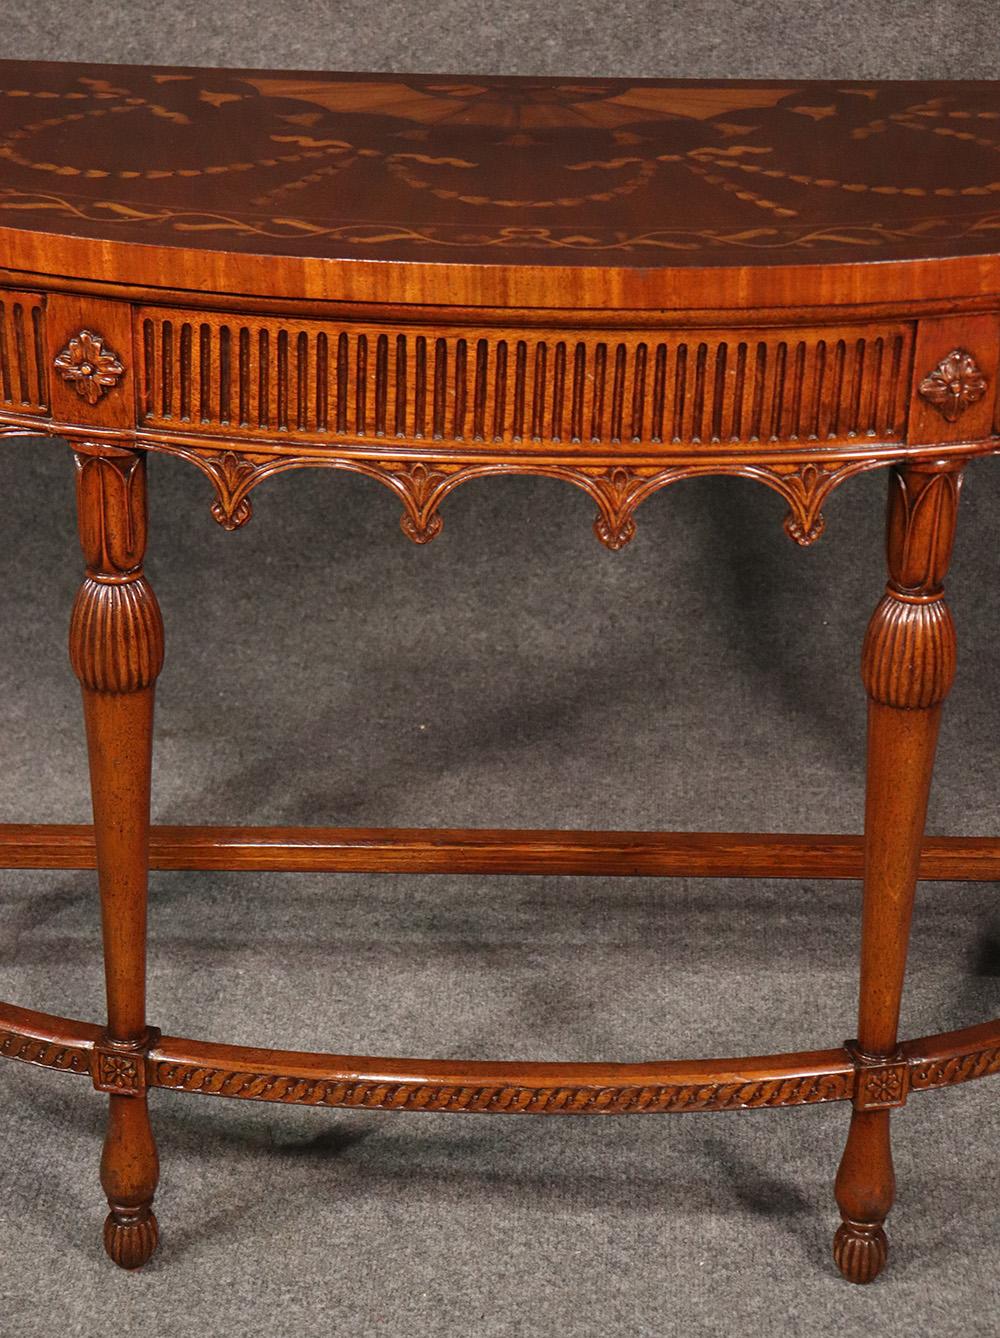 This is a superbly inlaid and finely crafted French style console table with exceptionally well-done inlay and fine lines. The design is beautifully handled. Dates to the 1950s era.

Measures: 46 wide x 32 tall x 16 deep.